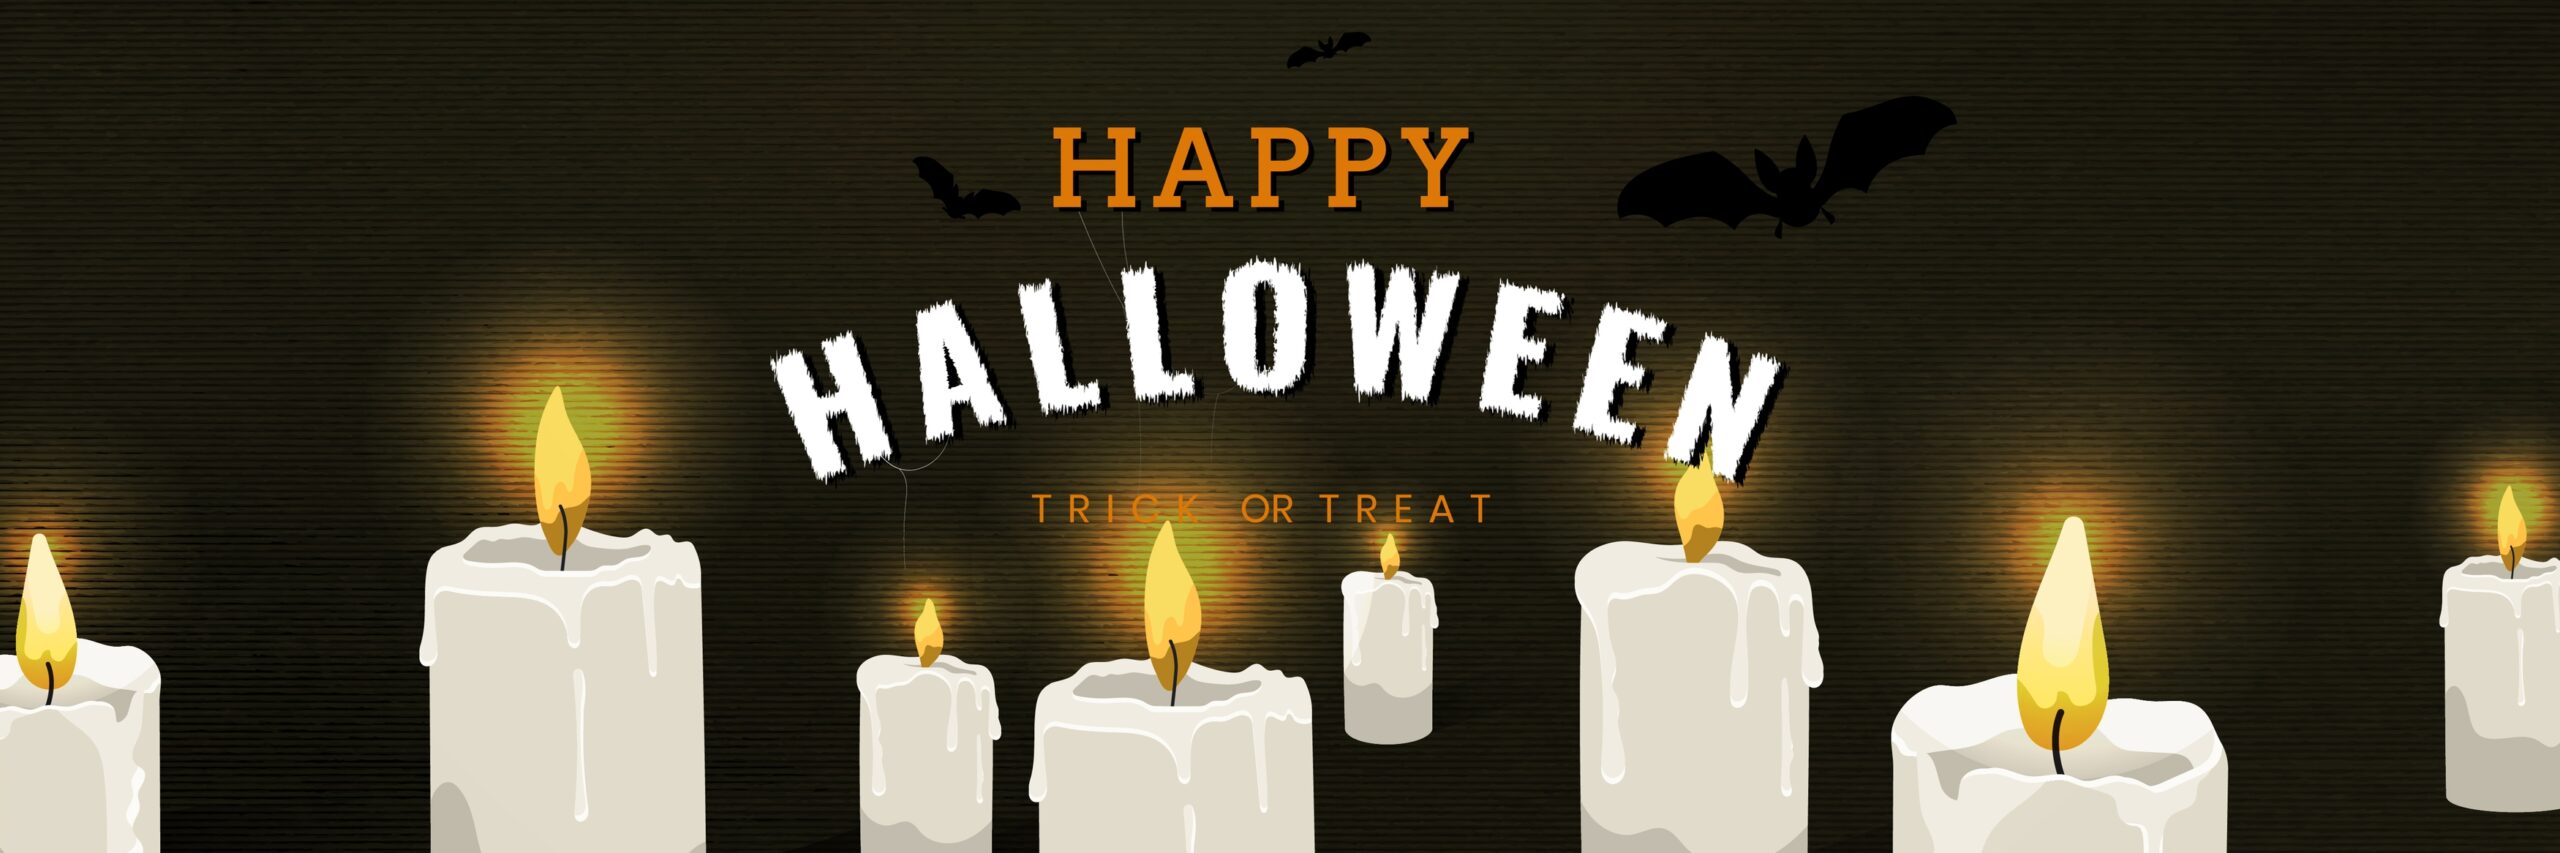 Black background with HAPPY HALLOWEEN TRICK OR TREAT text above lit candles